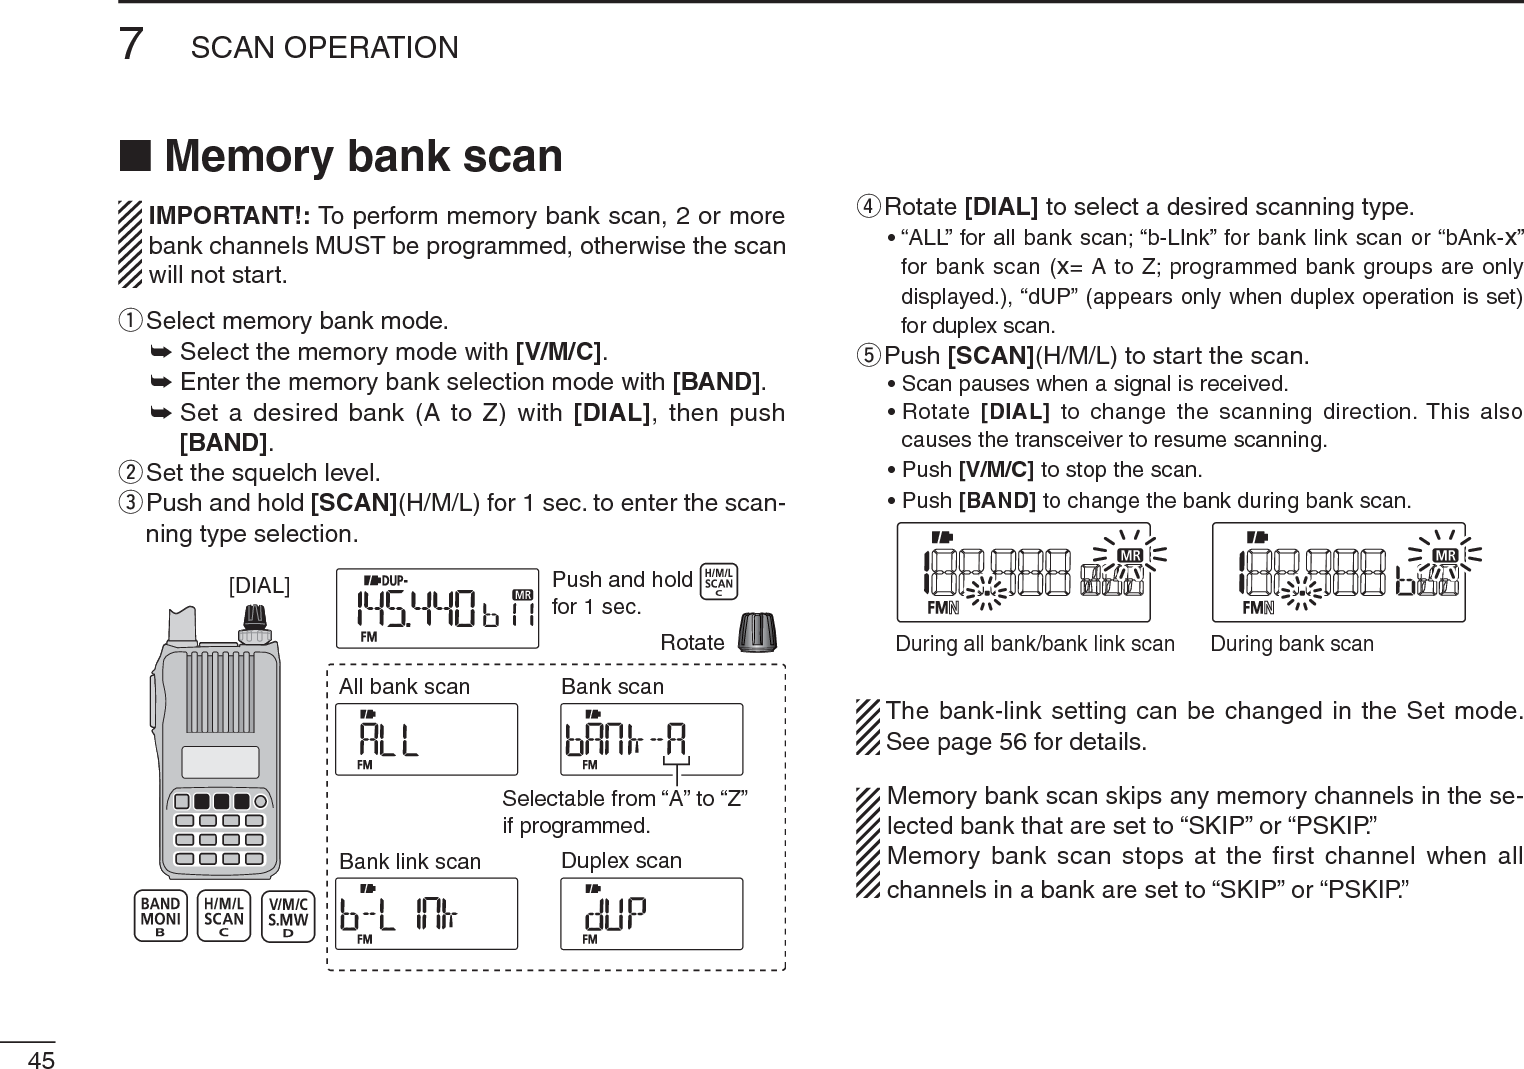 457SCAN OPERATIONN Memory bank scan IMPORTANT!: To perform memory bank scan, 2 or more  bank channels MUST be programmed, otherwise the scan will not start.q  Select memory bank mode.±Select the memory mode with [V/M/C].± Enter the memory bank selection mode with [BAND].±Set a desired bank (A to Z) with [DIAL], then push [BAND].wSet the squelch level.e  Push and hold [SCAN](H/M/L) for 1 sec. to enter the scan-ning type selection.[DIAL]All bank scanBank link scanBank scanDuplex scanPush and holdfor 1 sec.RotateSelectable from “A” to “Z”if programmed.r  Rotate [DIAL] to select a desired scanning type.• “ALL” for all bank scan; “b-LInk” for bank link scan or “bAnk-x” for bank scan (x= A to Z; programmed bank groups are only displayed.), “dUP” (appears only when duplex operation is set) for duplex scan.tPush [SCAN](H/M/L) to start the scan.• Scan pauses when a signal is received.• Rotate  [DIAL] to change the scanning direction. This also causes the transceiver to resume scanning.• Push [V/M/C] to stop the scan.• Push [BAND] to change the bank during bank scan.During all bank/bank link scan During bank scanThe bank-link setting can be changed in the Set mode. See page 56 for details.Memory bank scan skips any memory channels in the se-lected bank that are set to “SKIP” or “PSKIP.”Memory bank scan stops at the ﬁrst channel when all channels in a bank are set to “SKIP” or “PSKIP.”